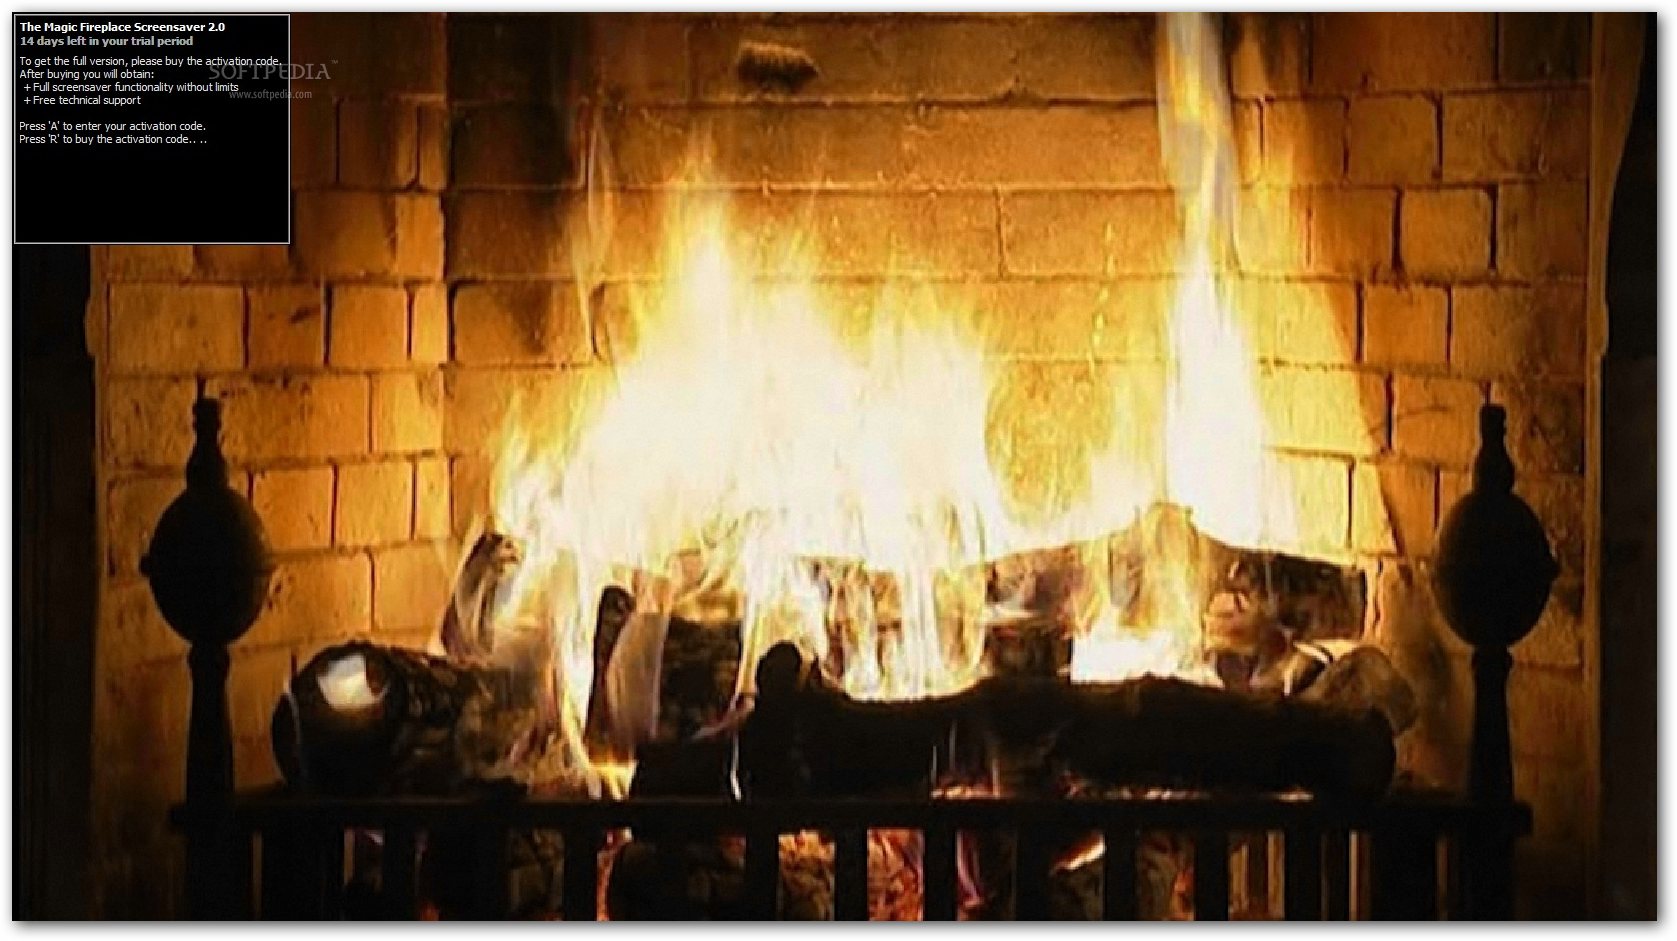 Free Download The Magic Fireplace Screensaver 2.00 - A screensaver that displays a burning fireplace